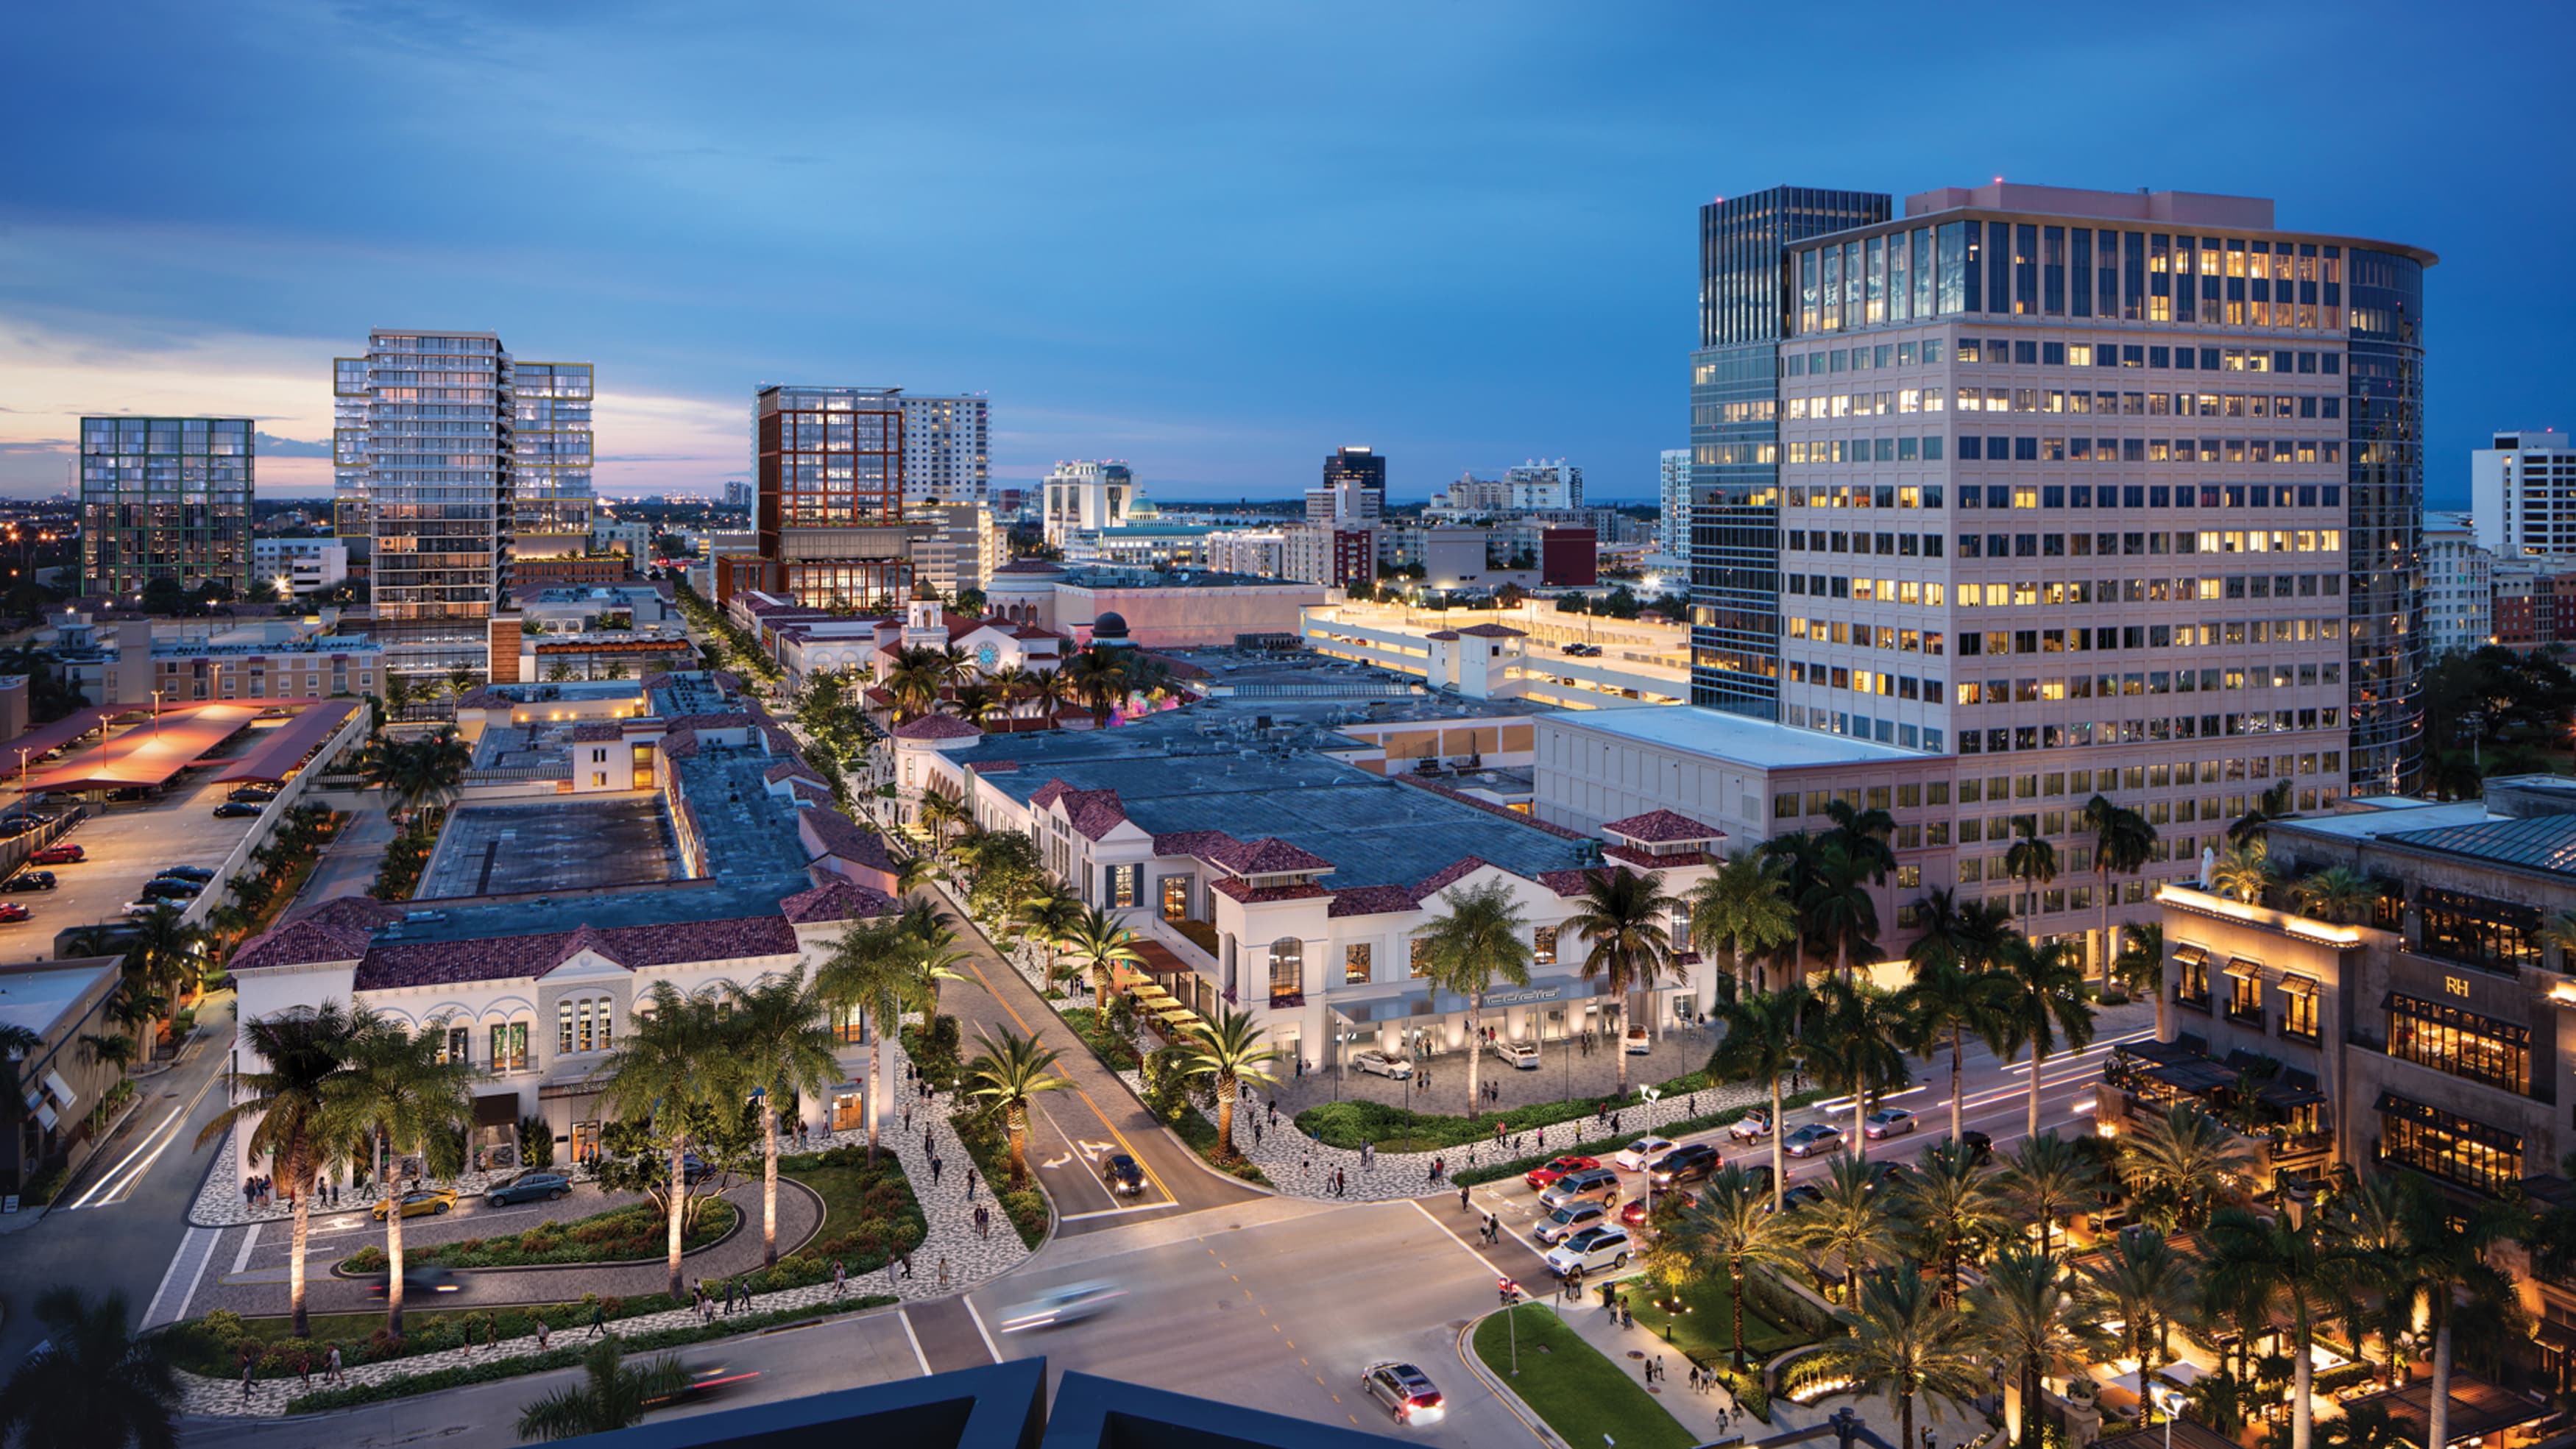 Evening aerial view of a retail center in West Palm Beach, Florida